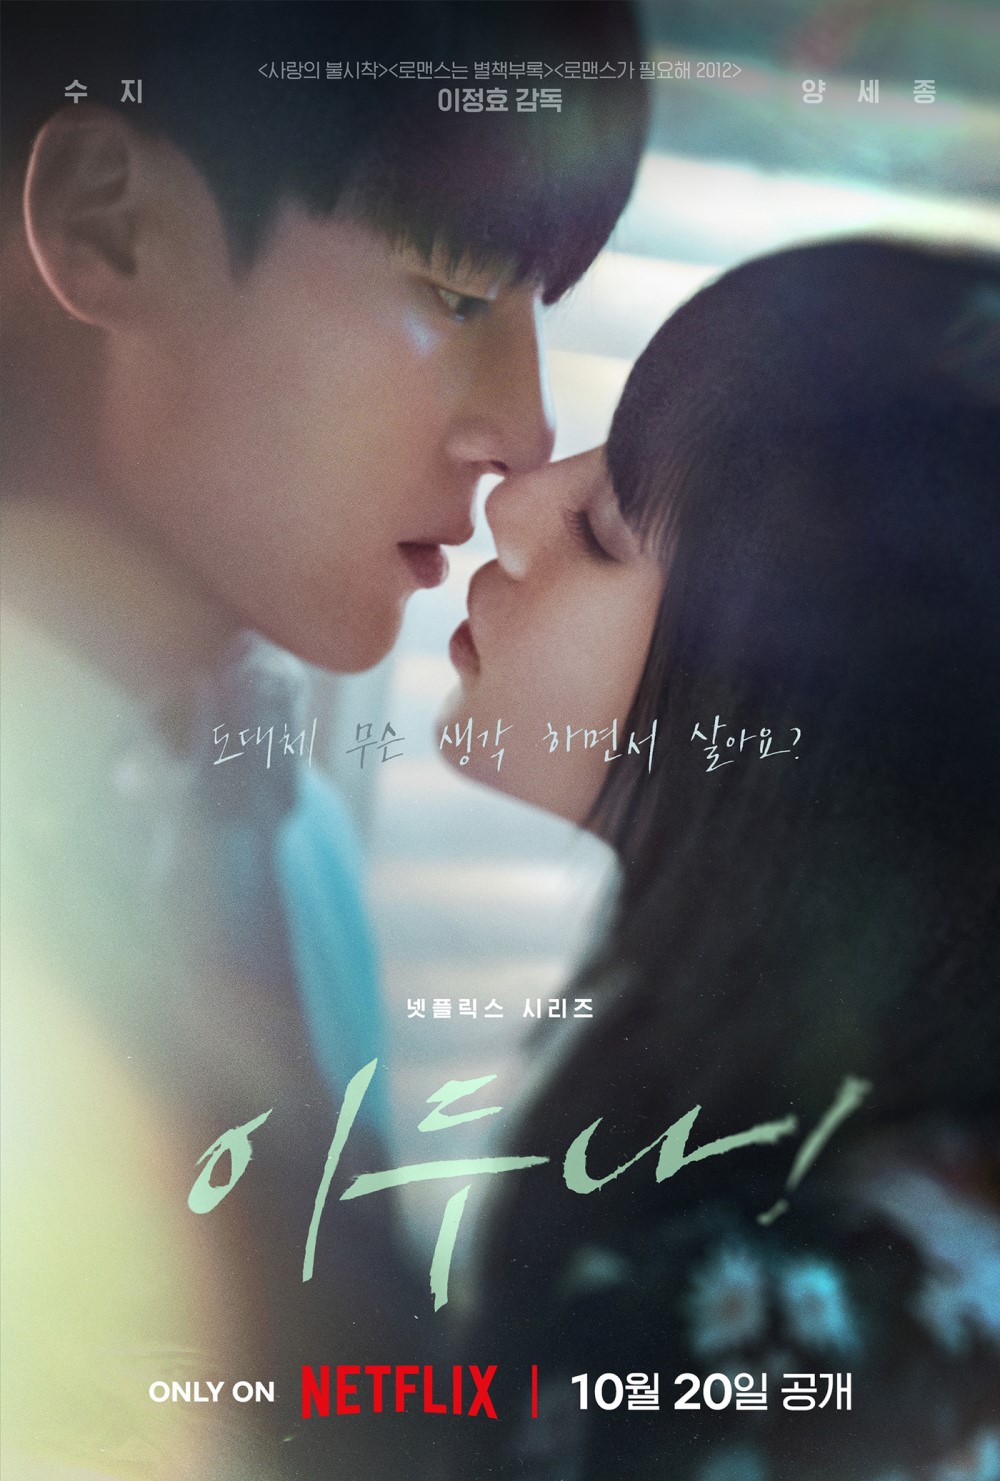 Suzy and Yang Se-jong find love and angst in Doona